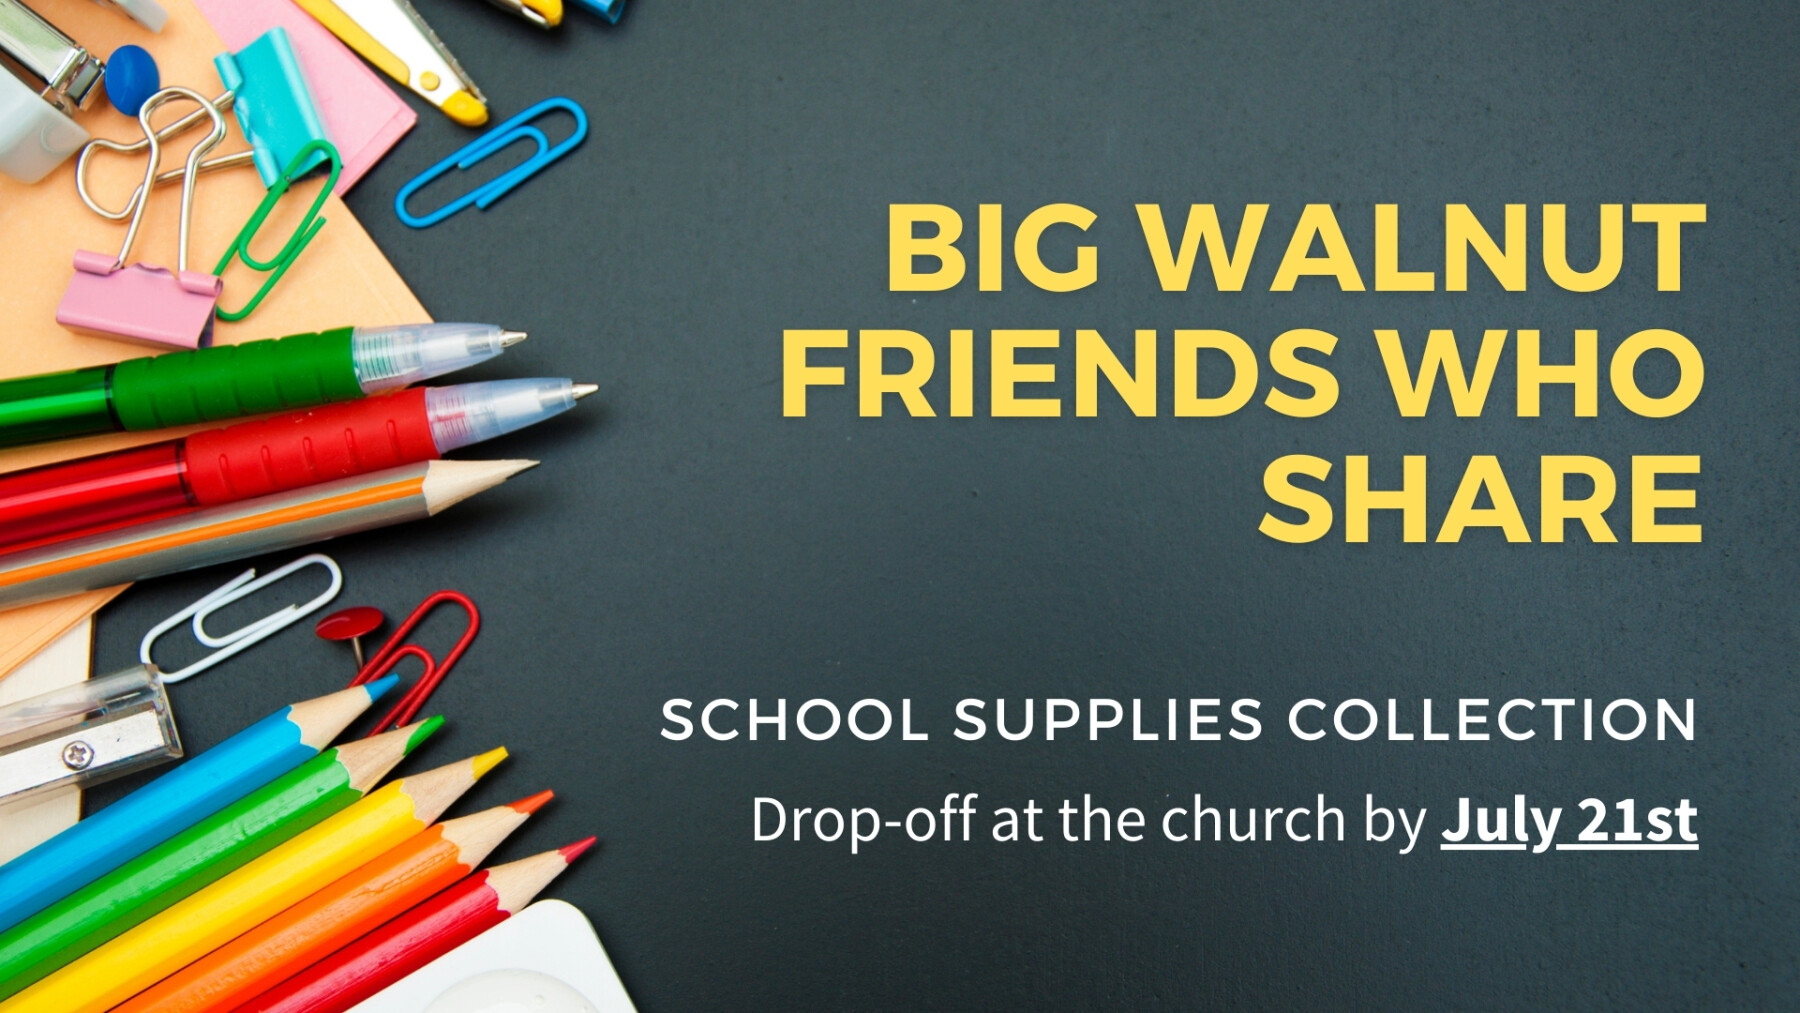 Big Walnut Friends Who Share - School Supplies Collection